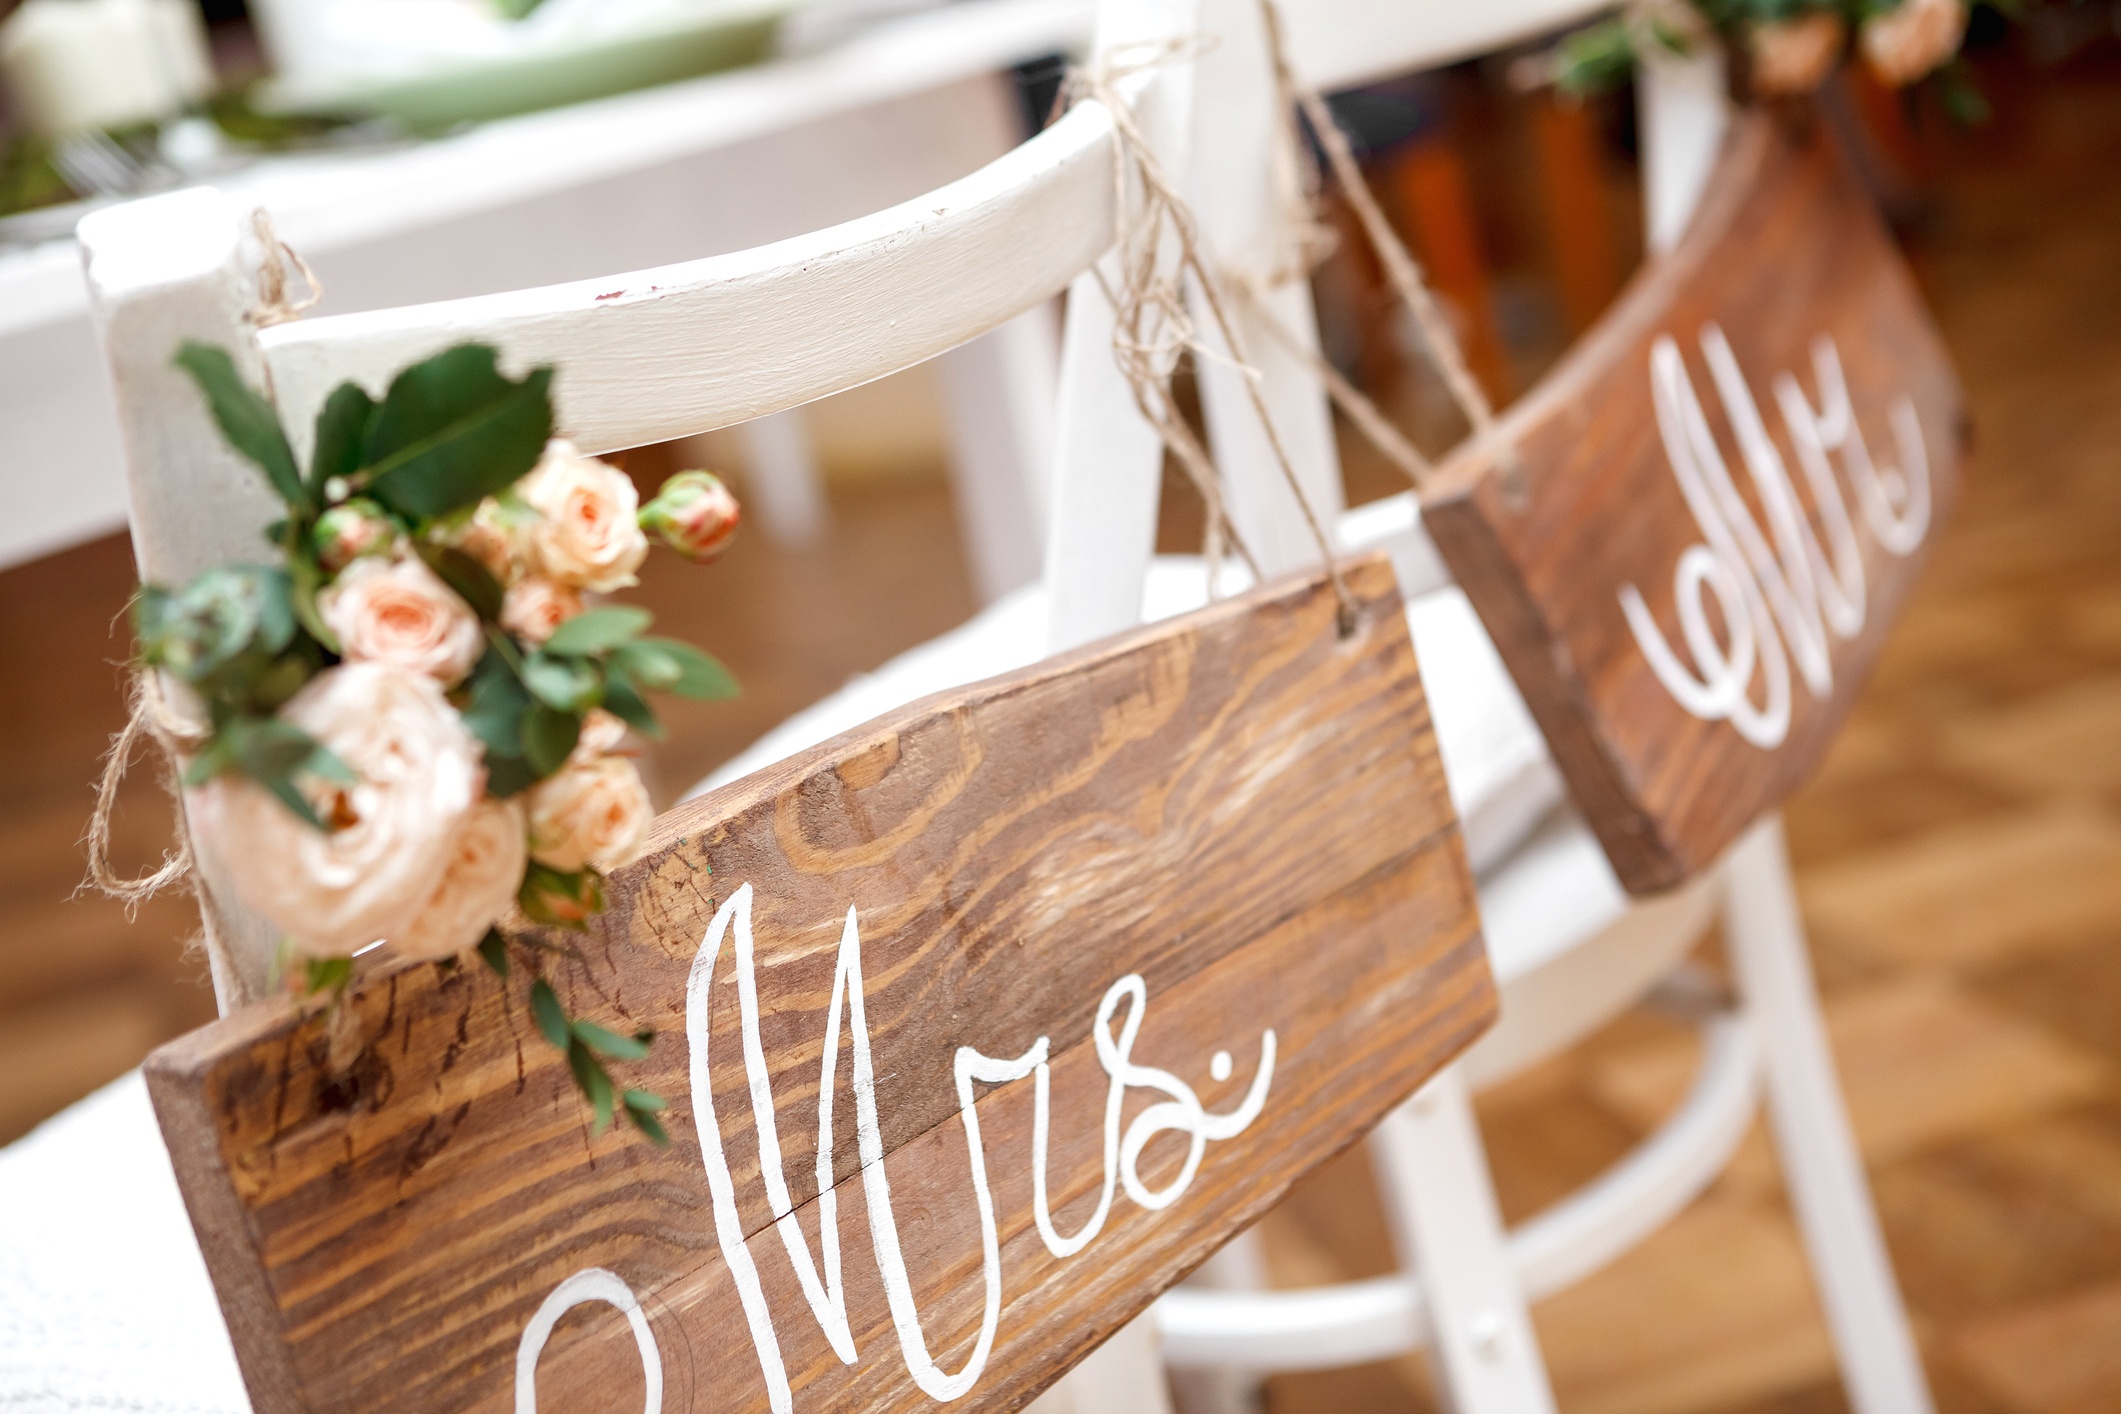 Planning a microwedding may not include chiavari chairs